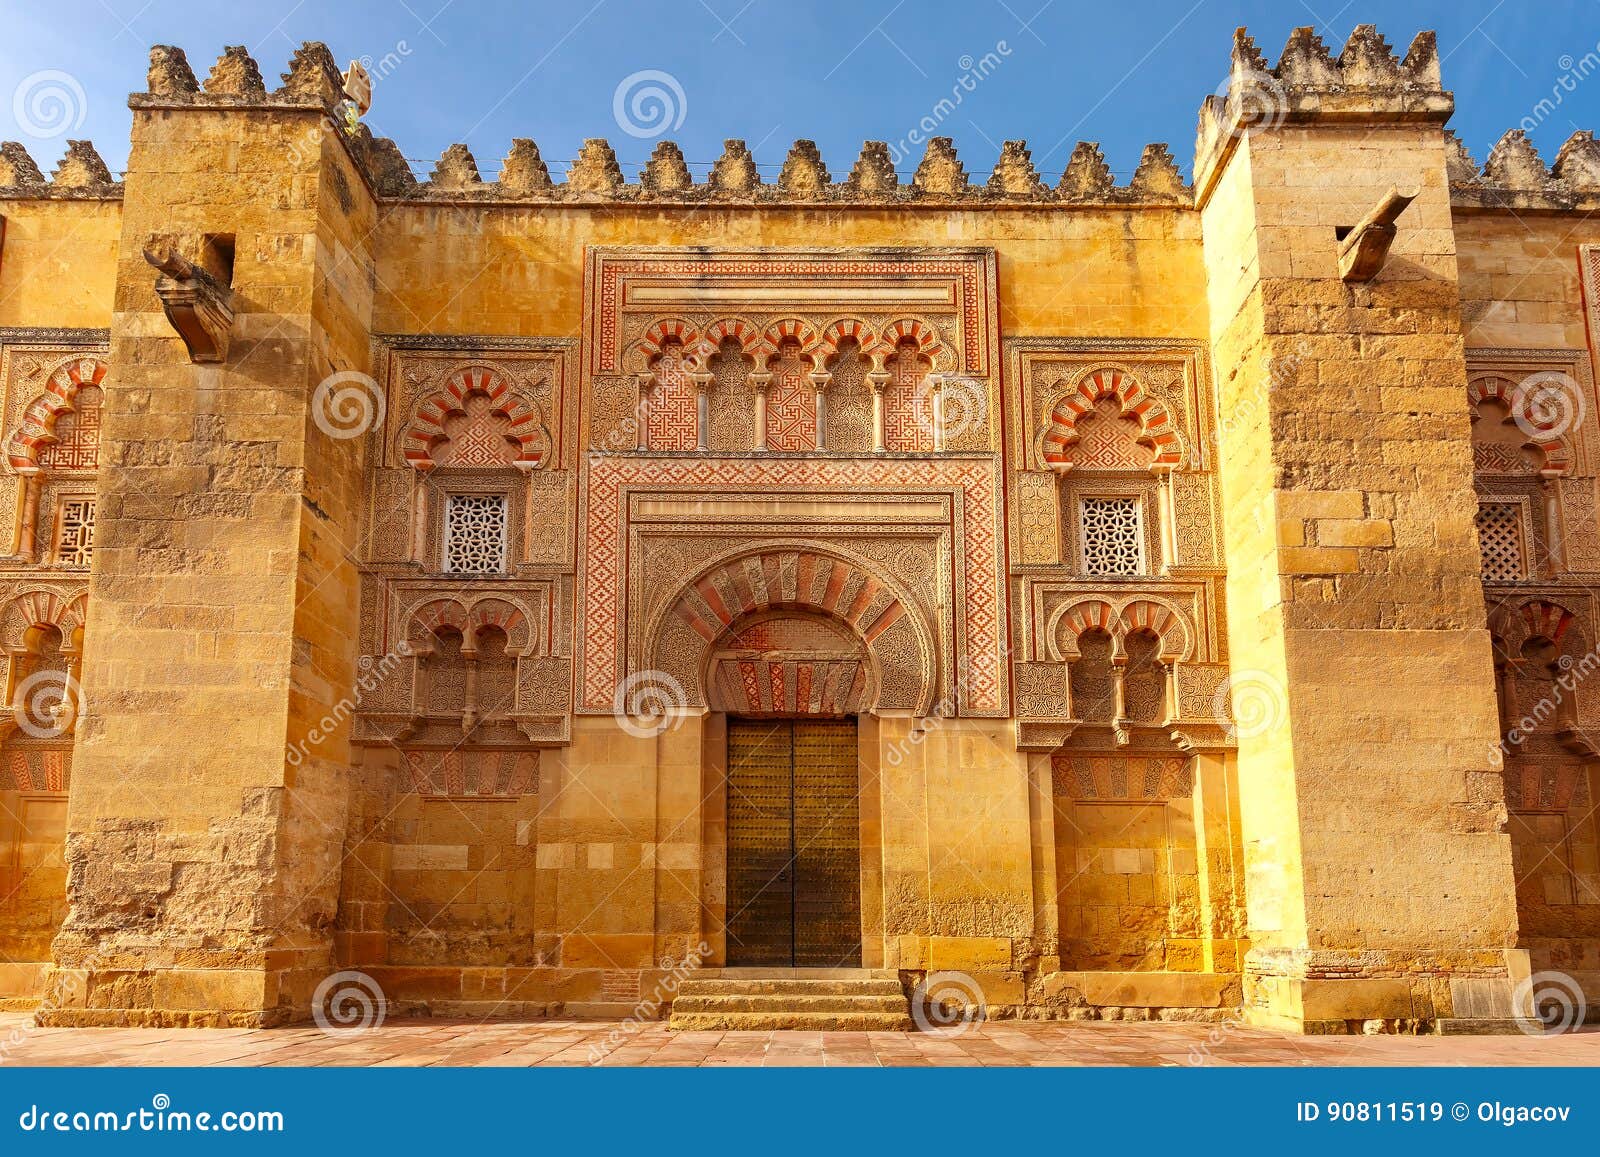 the wall of great mosque mezquita, cordoba, spain